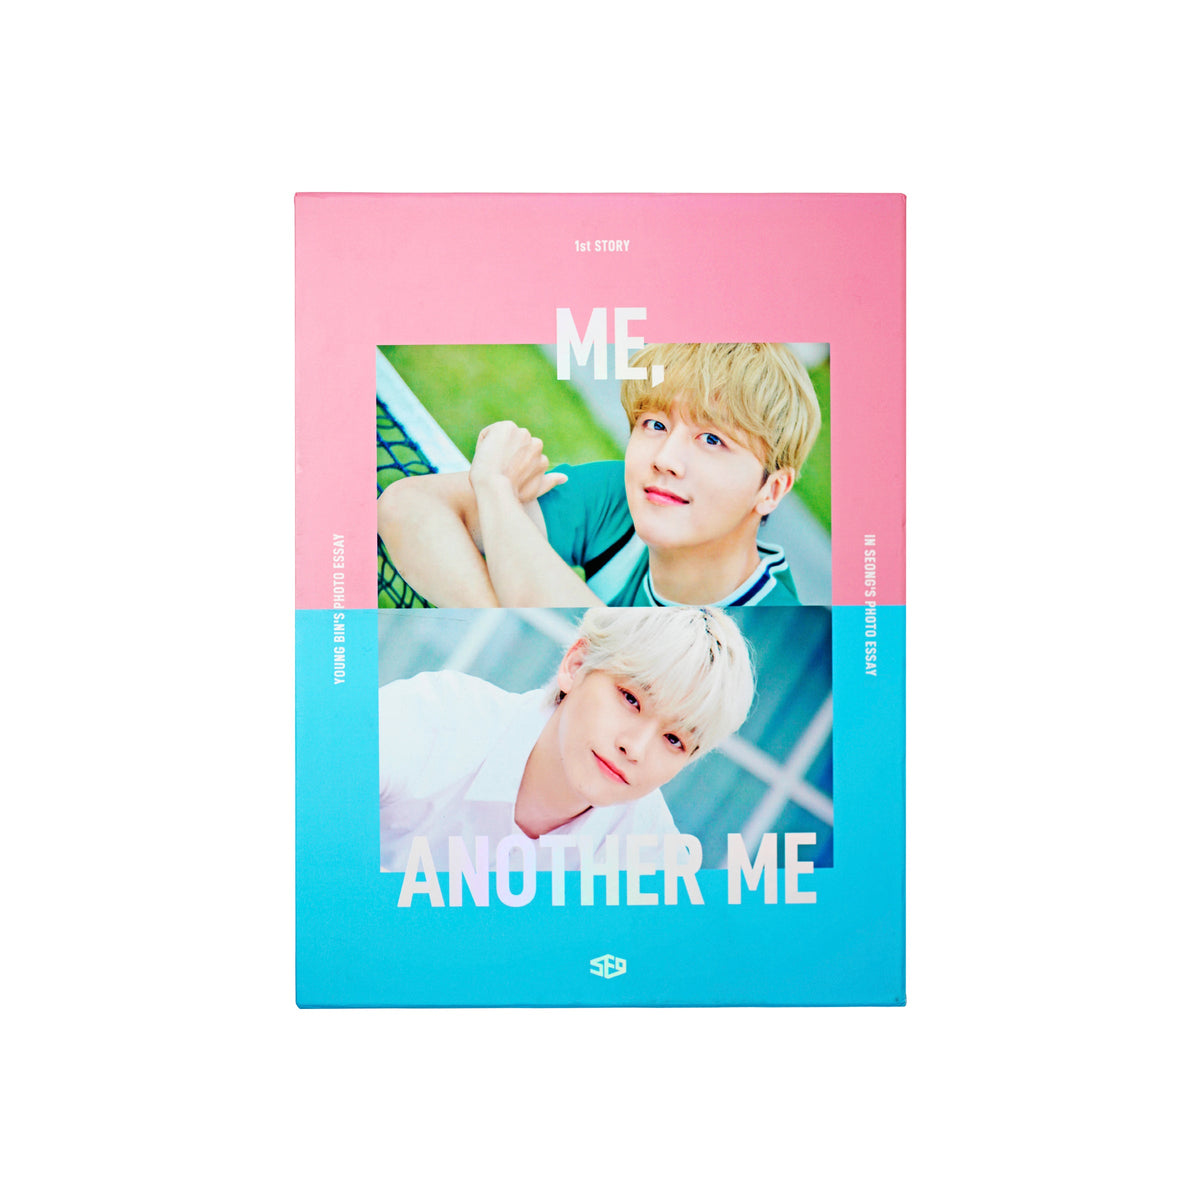 SF9 Young Bin &amp; Inseong - ME, ANOTHER ME Photo Essay Set 2 Variations Ver Main Image